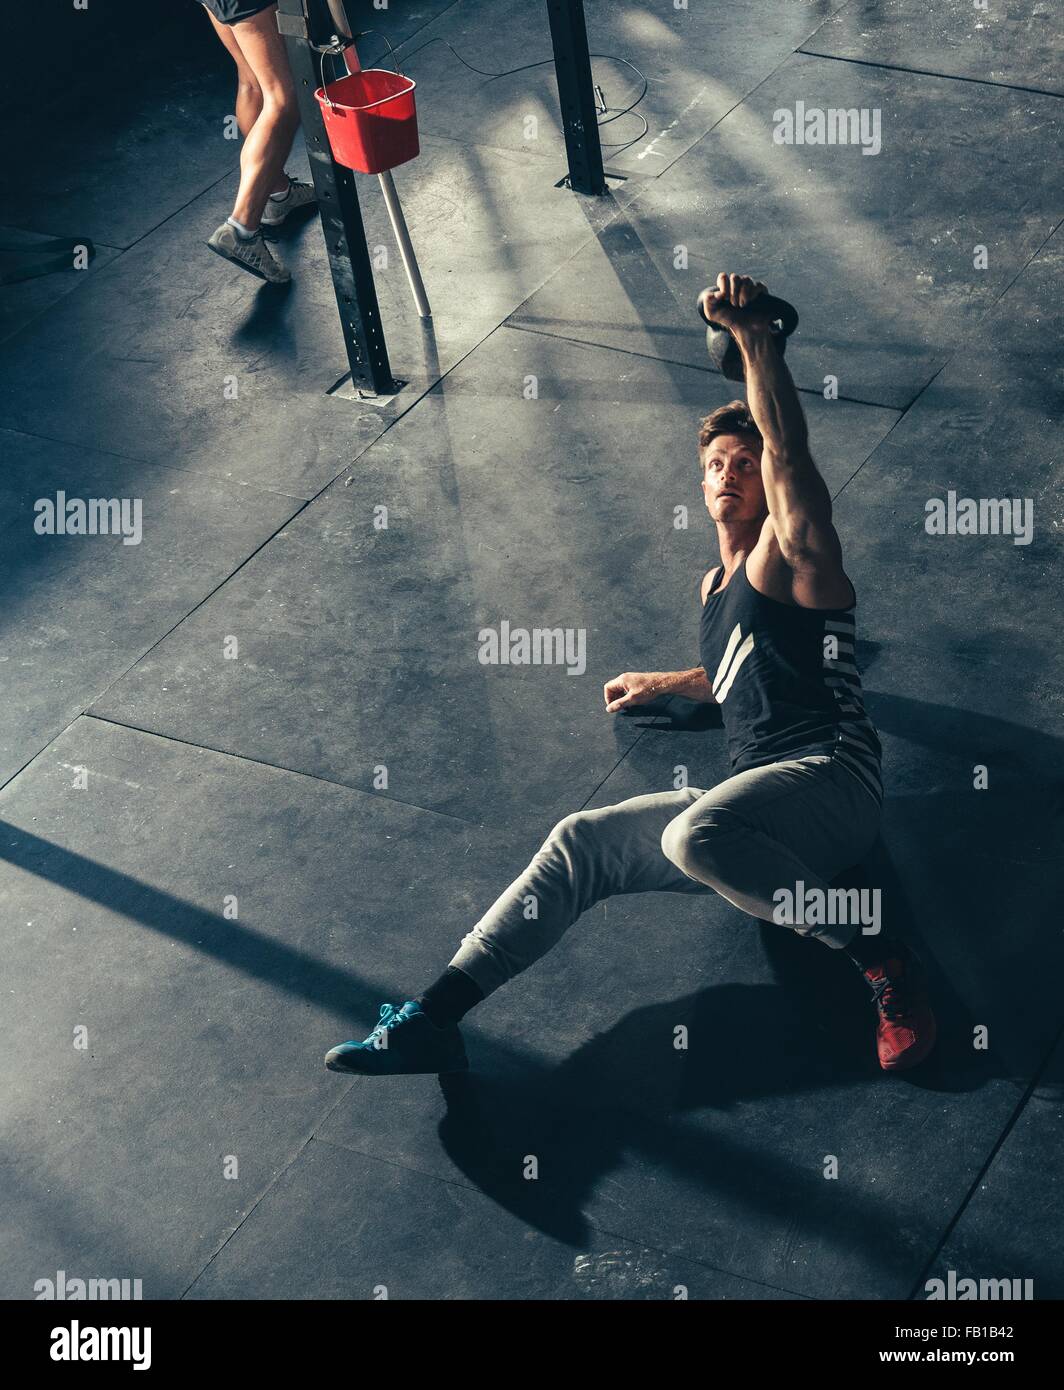 High angle view of man training with kettlebell in gym Stock Photo